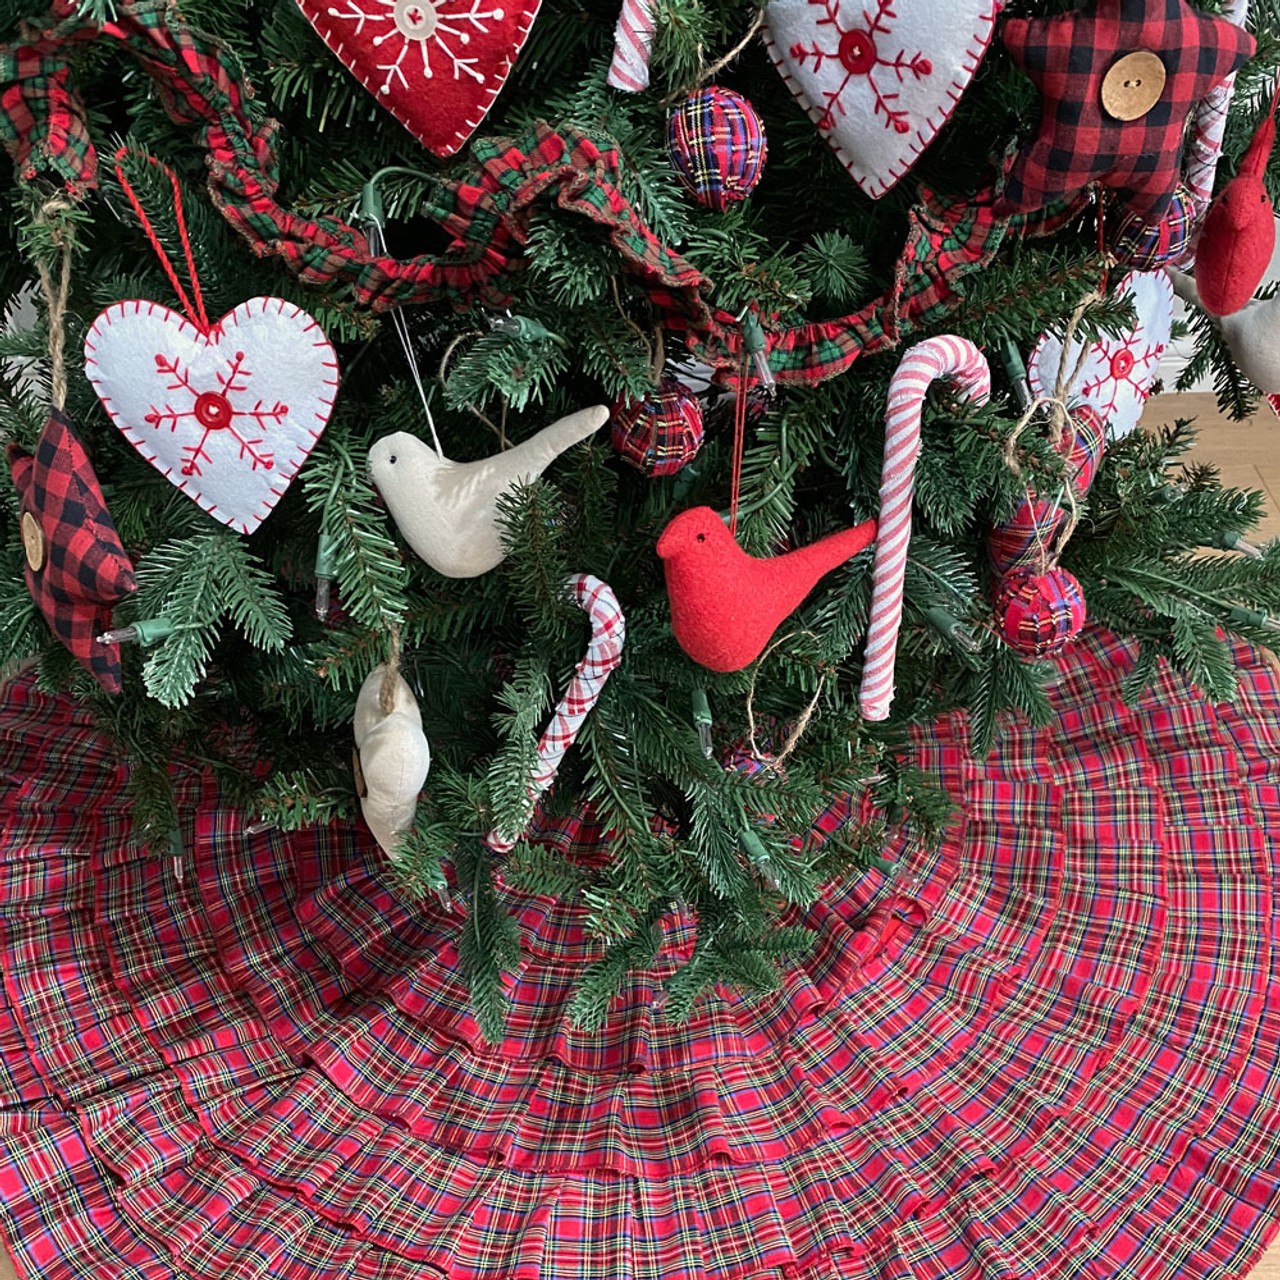 White Felt Fabric Heart Christmas Ornaments - Set of 3 - by Marilee Home -  Jubilee Fabric